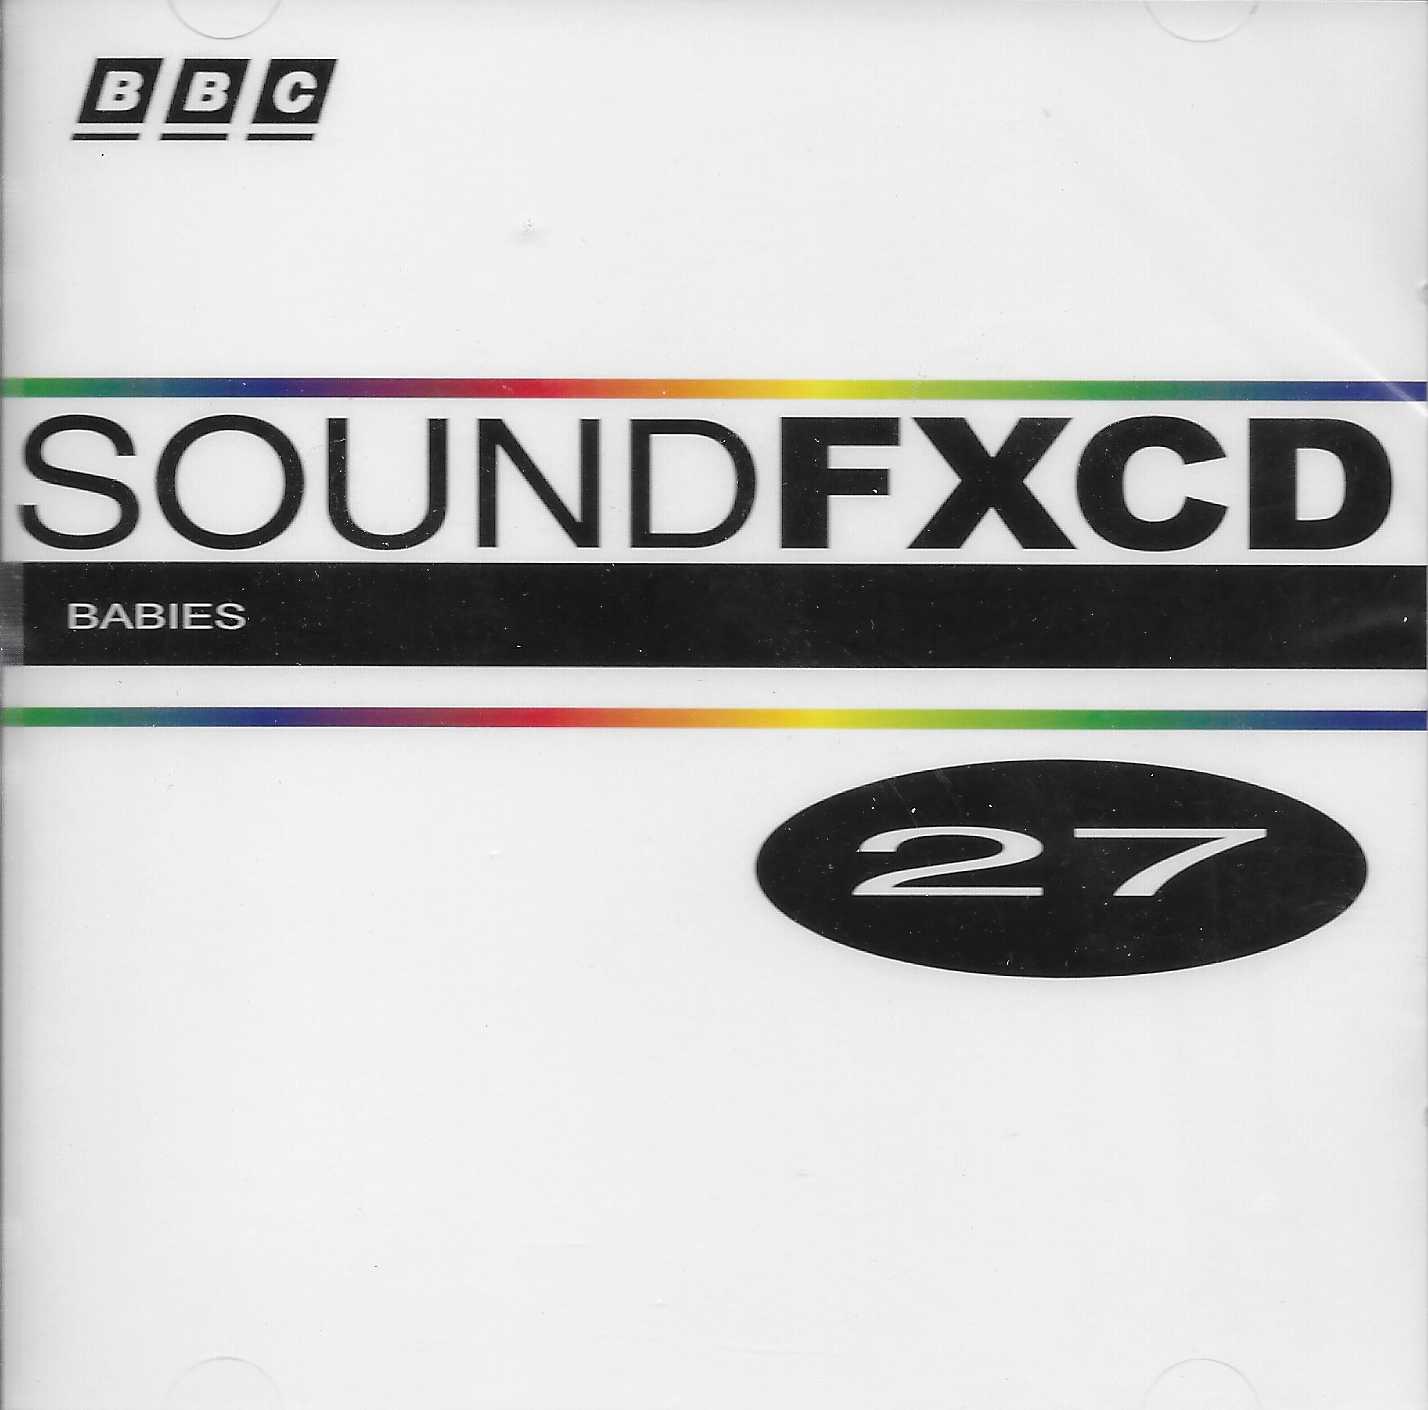 Front cover of BBCCD SFX027